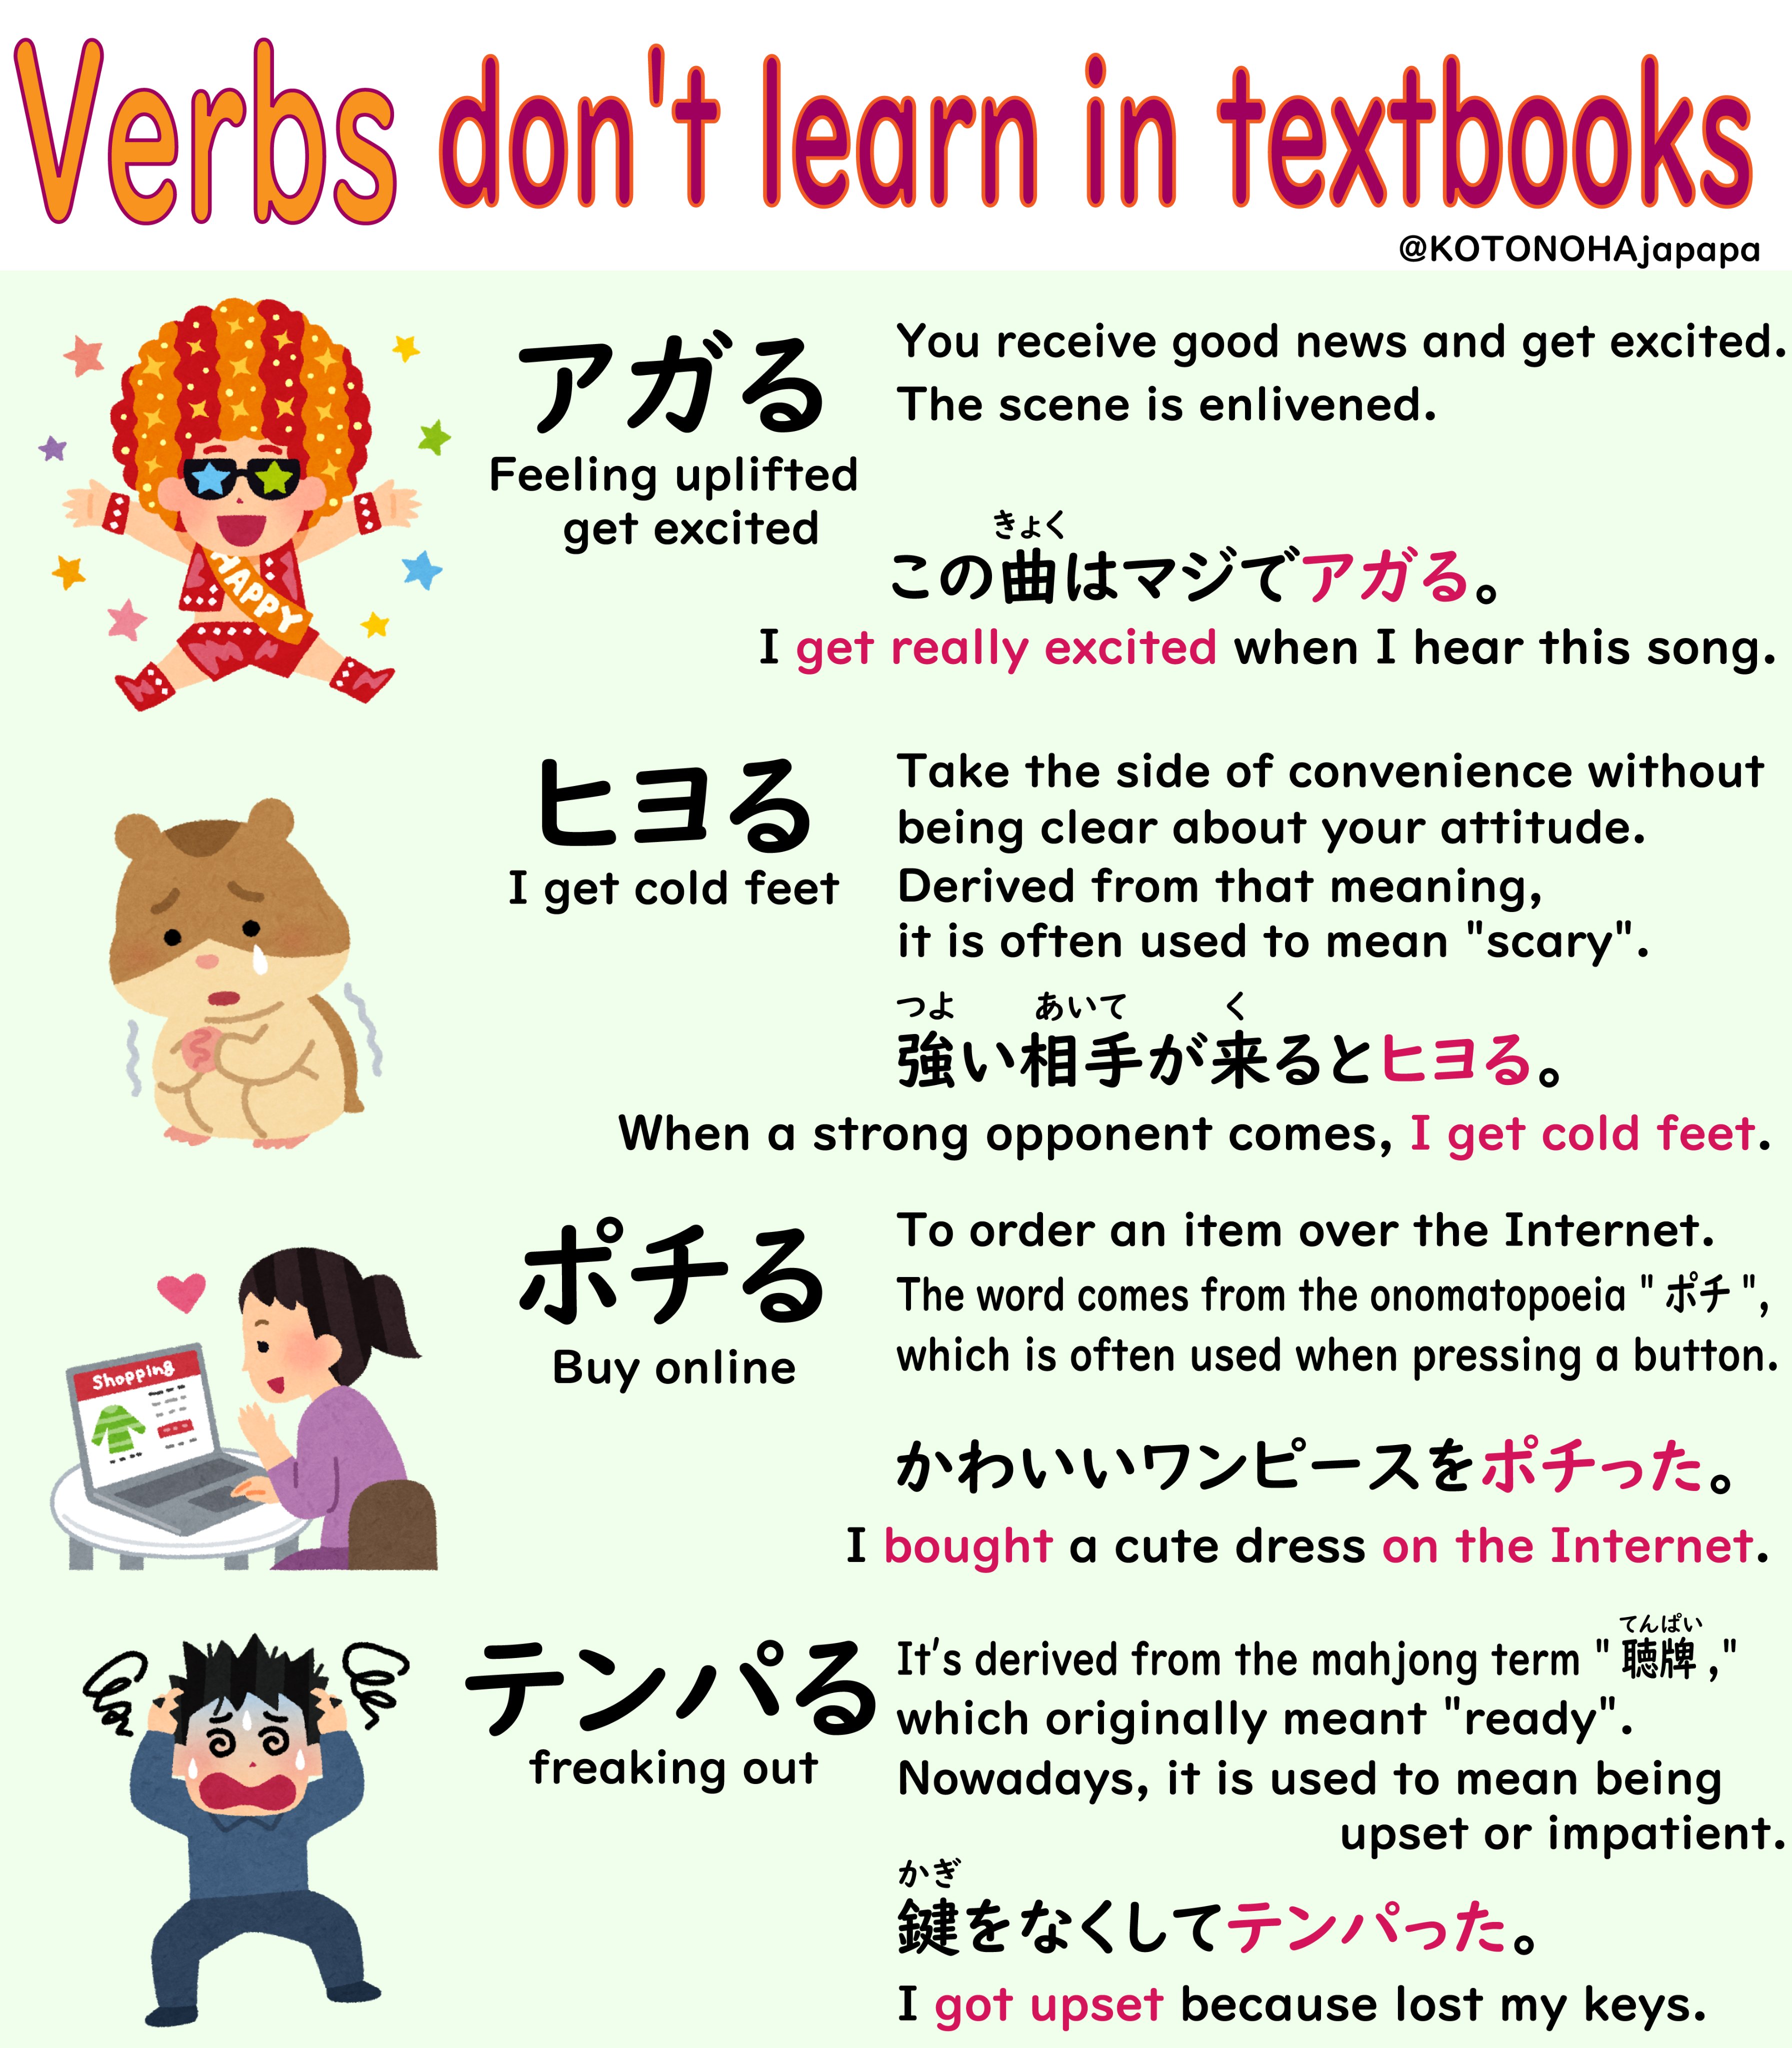 Kotonoha Japanese A Twitter There Are Many Verbs That Are Used Mainly By Young People And The Internet That Have Become Or Are Becoming Popular In Society New Words Are Being Created